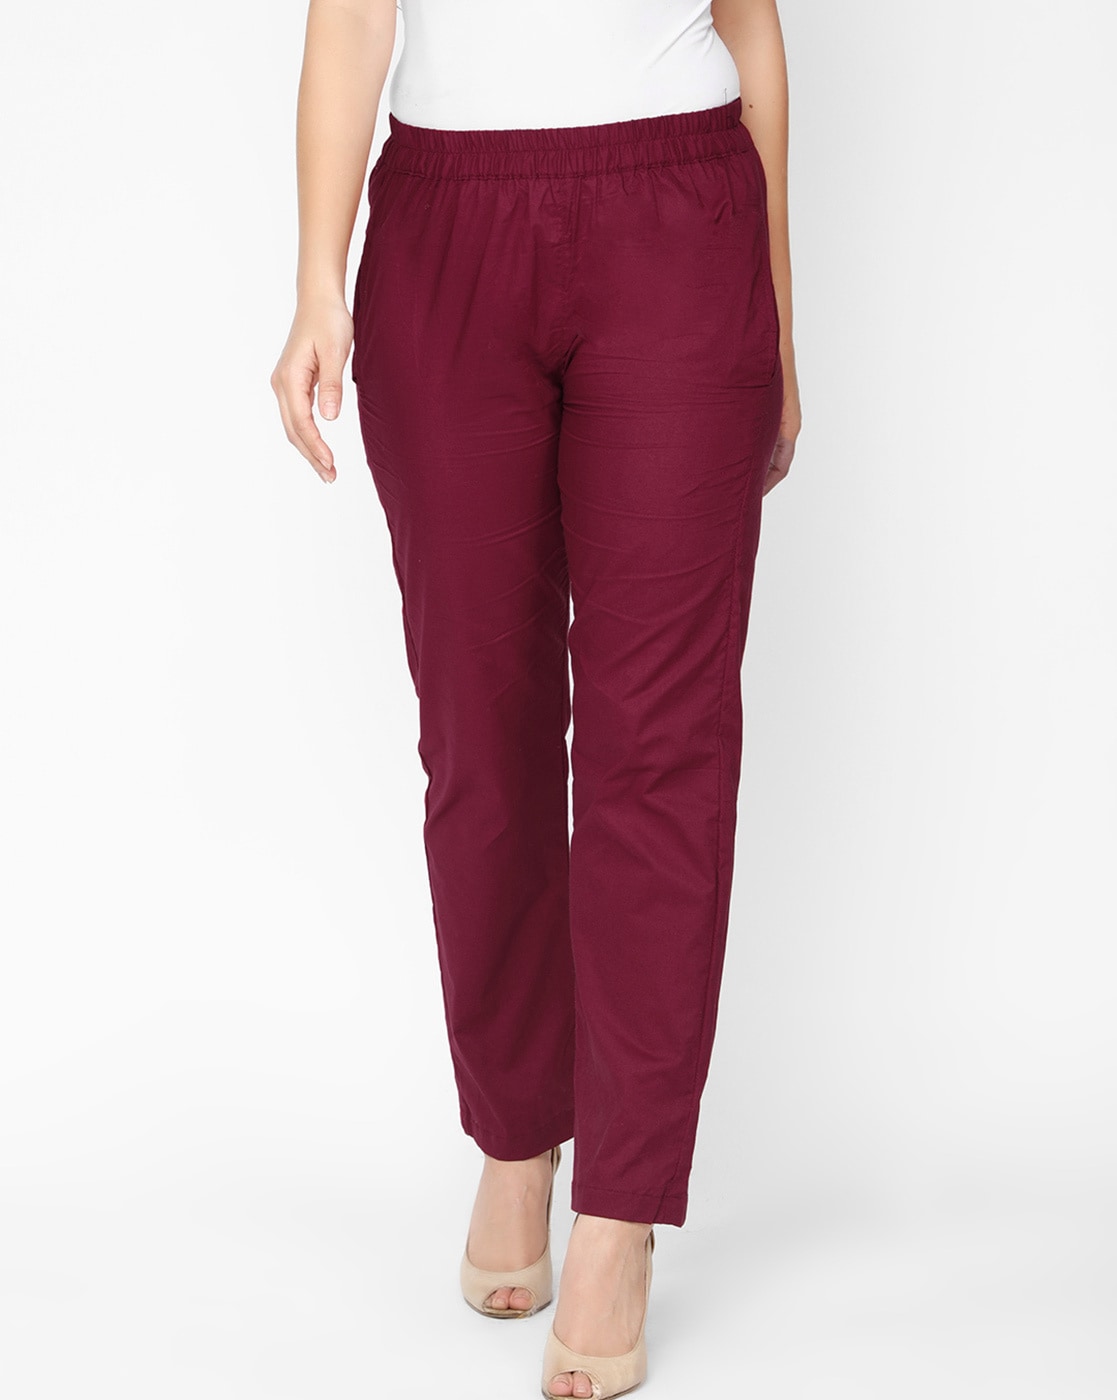 NIMIN Women's Satin Jogger Pants High Waisted Pull On Retro Belted Pant  Trousers with Pockets Burgundy Small at Amazon Women's Clothing store